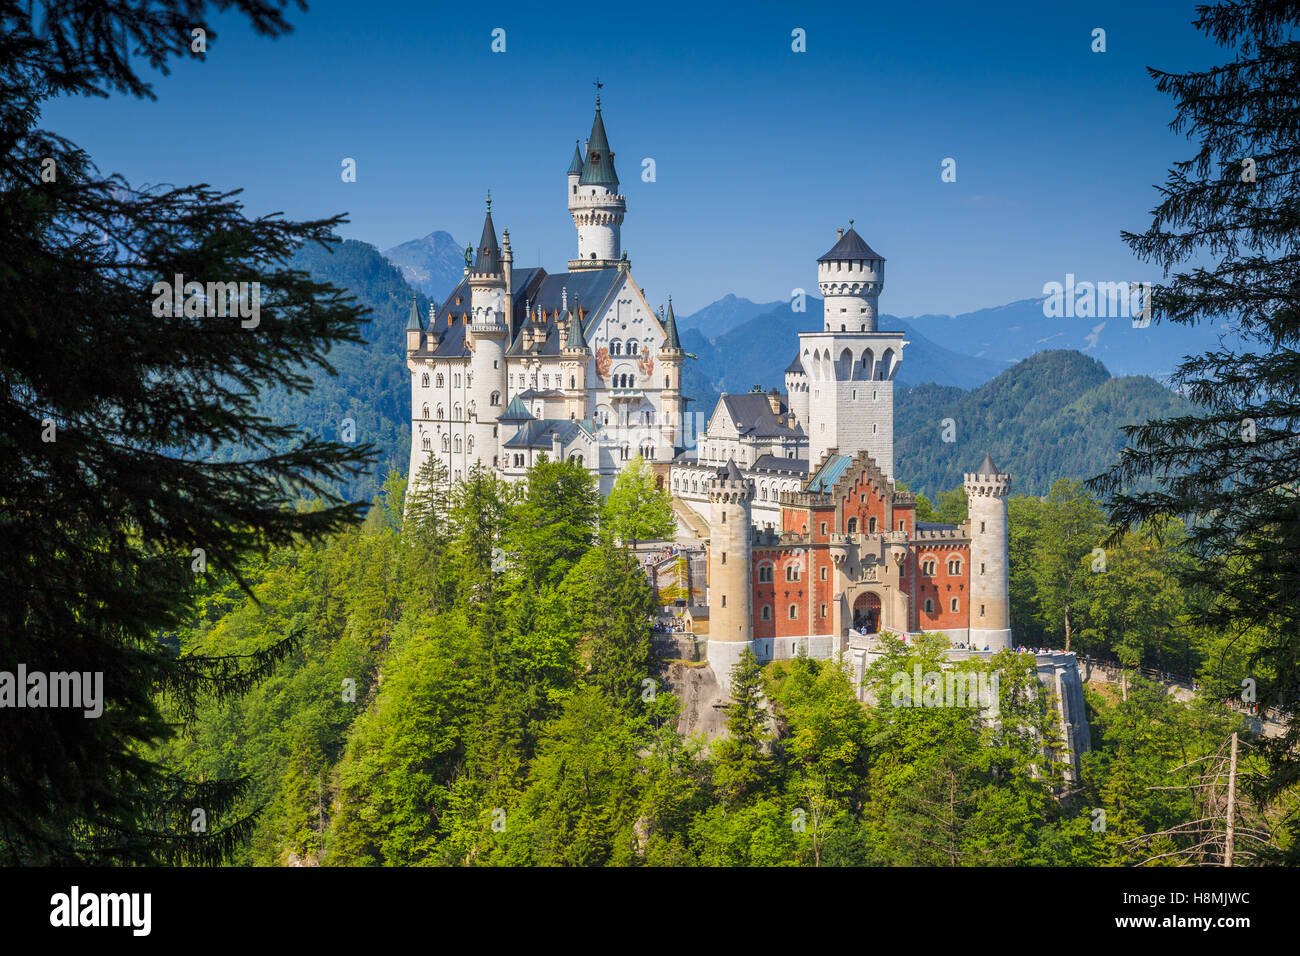 Classic view of world-famous Neuschwanstein Castle, one of Europe's most visited castles, in summer, Bavaria, Germany Stock Photo